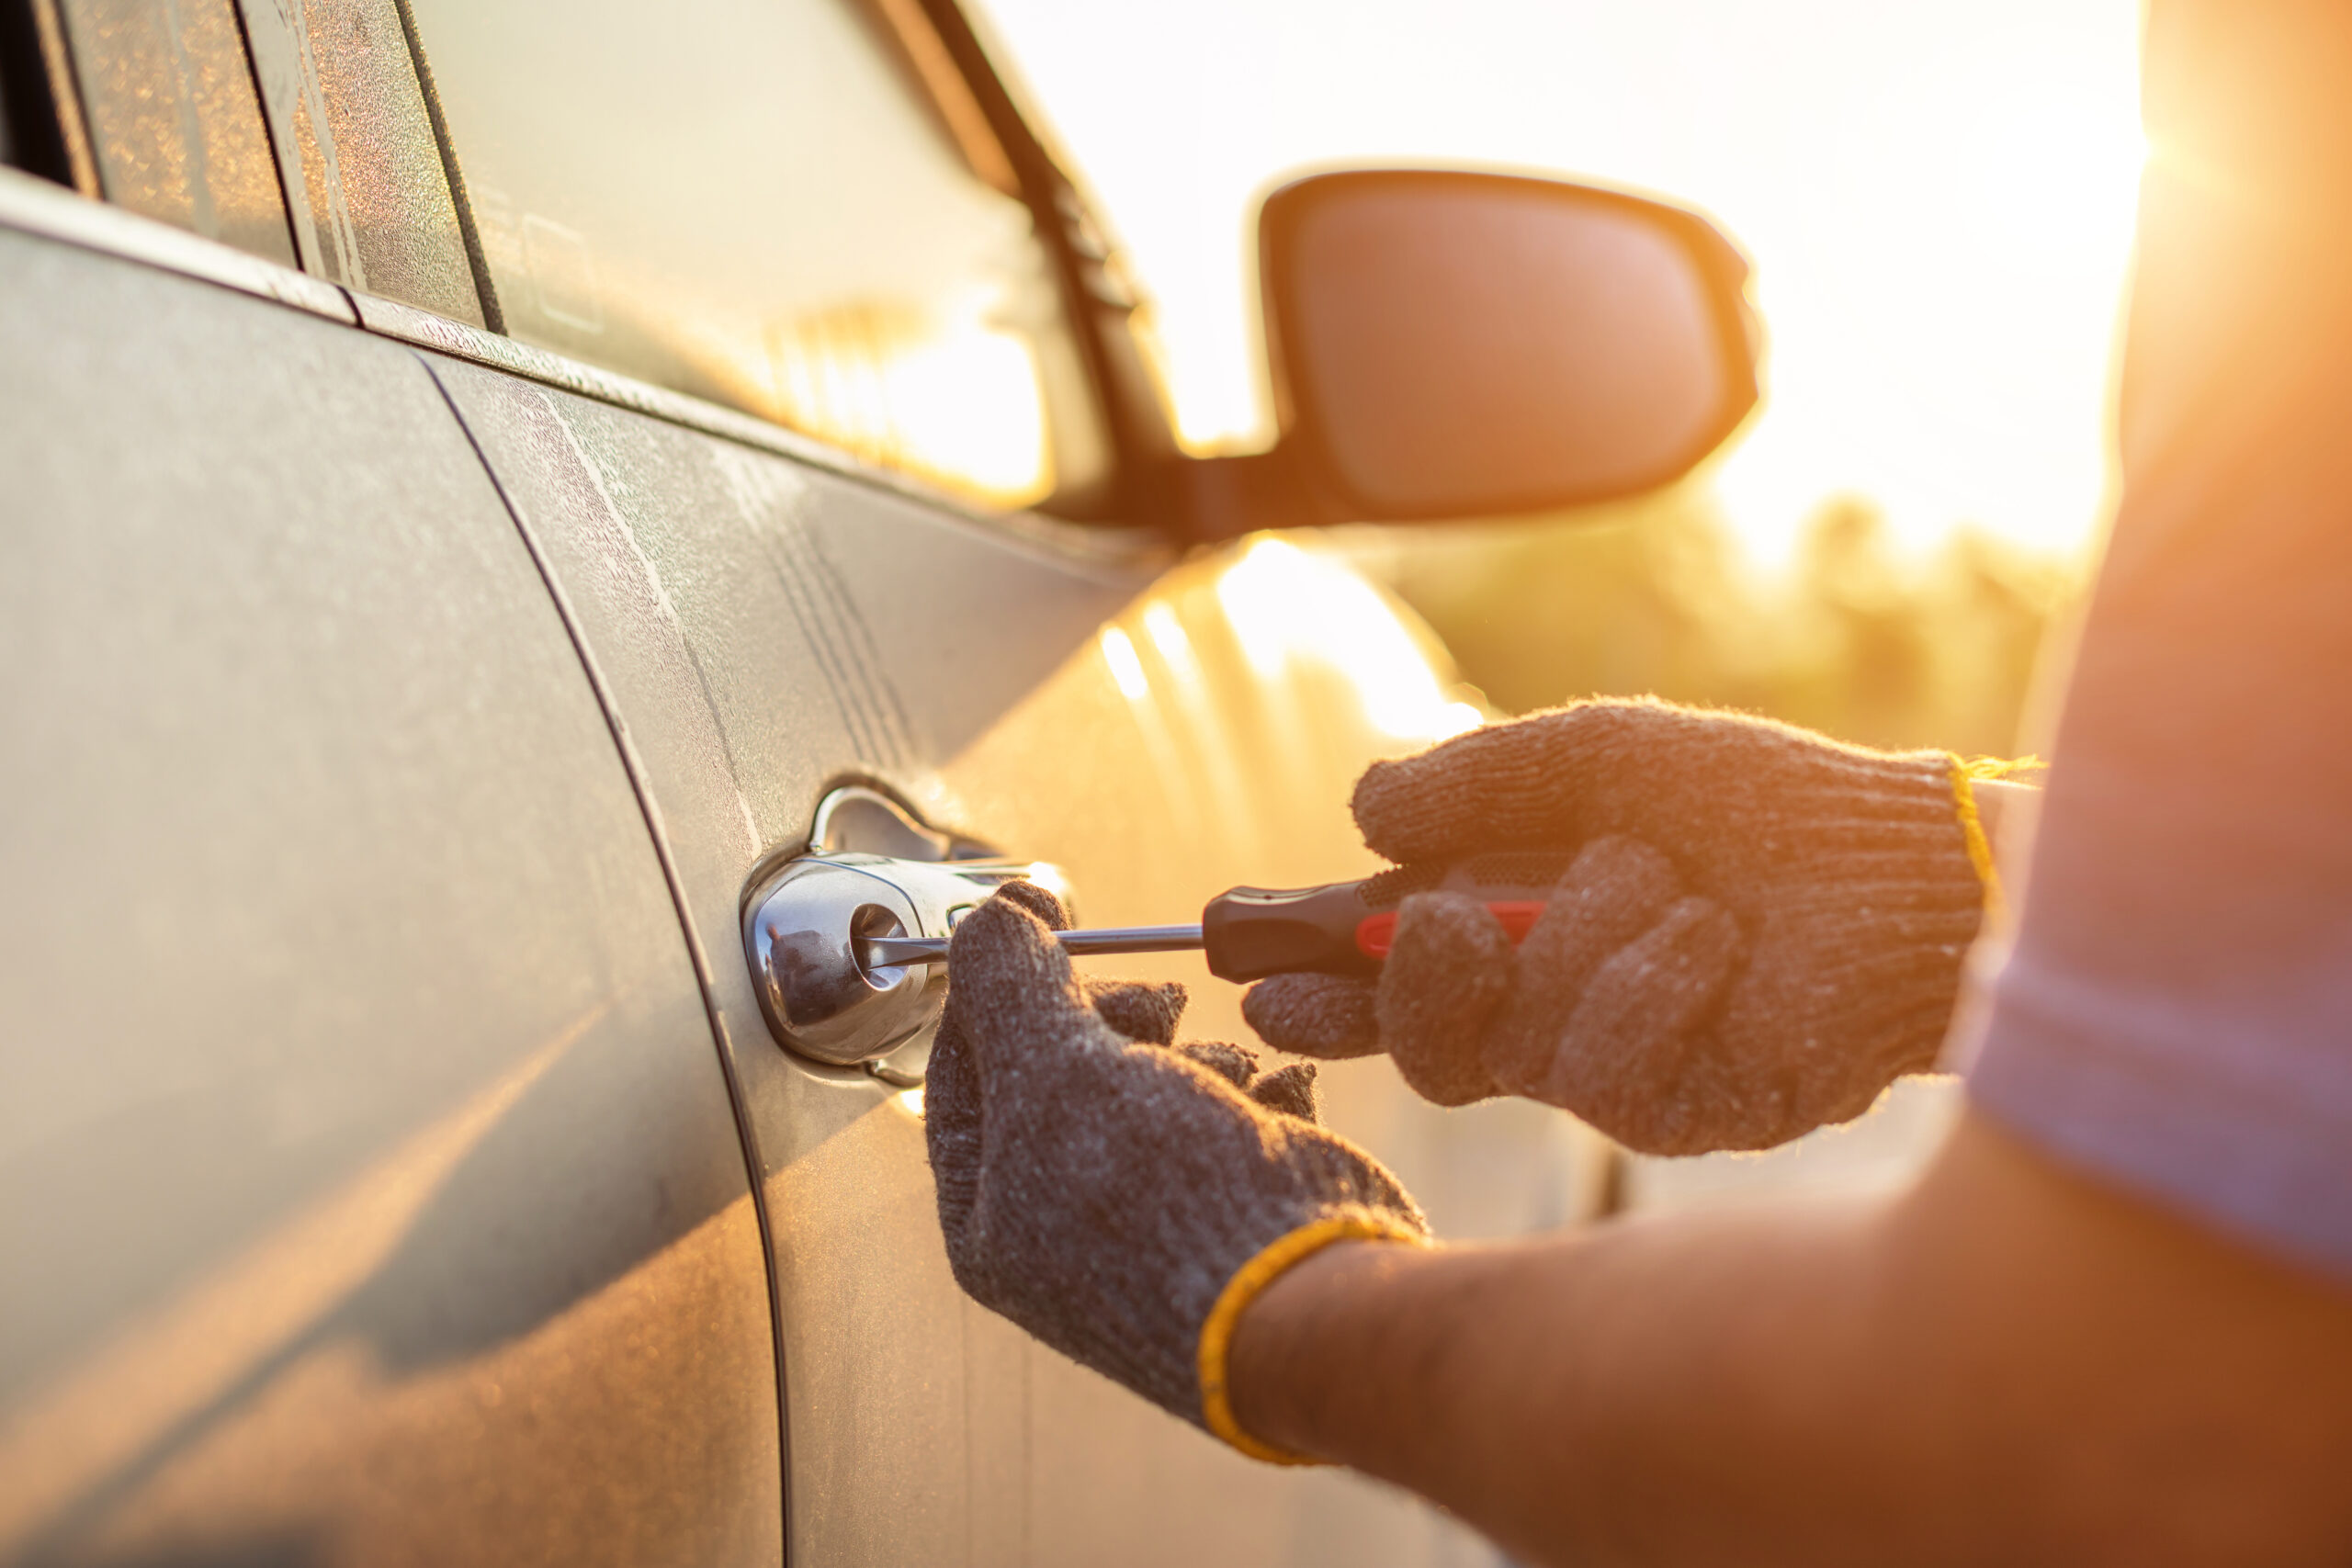 Close-up of a person using a key to unlock a car door, wearing gloves, with sunset light in the background. The focus is on the key entering the lock in an act of theft.